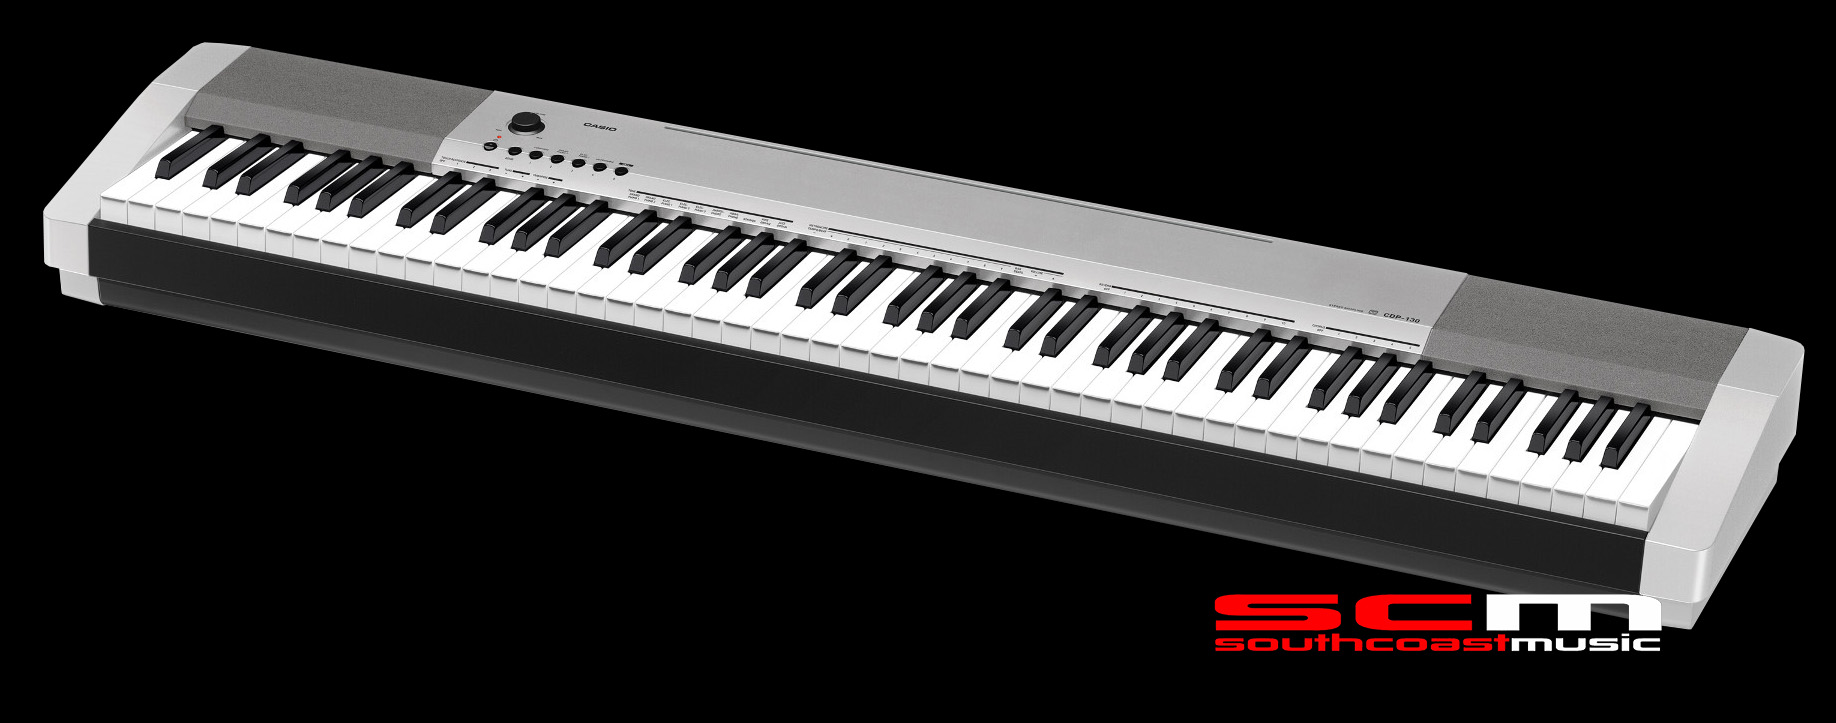 CASIO CDP130 SILVER COMPACT DIGITAL PIANO BRAND NEW MODEL IN STOCK NOW AT SOUTHCOASTMUSIC!